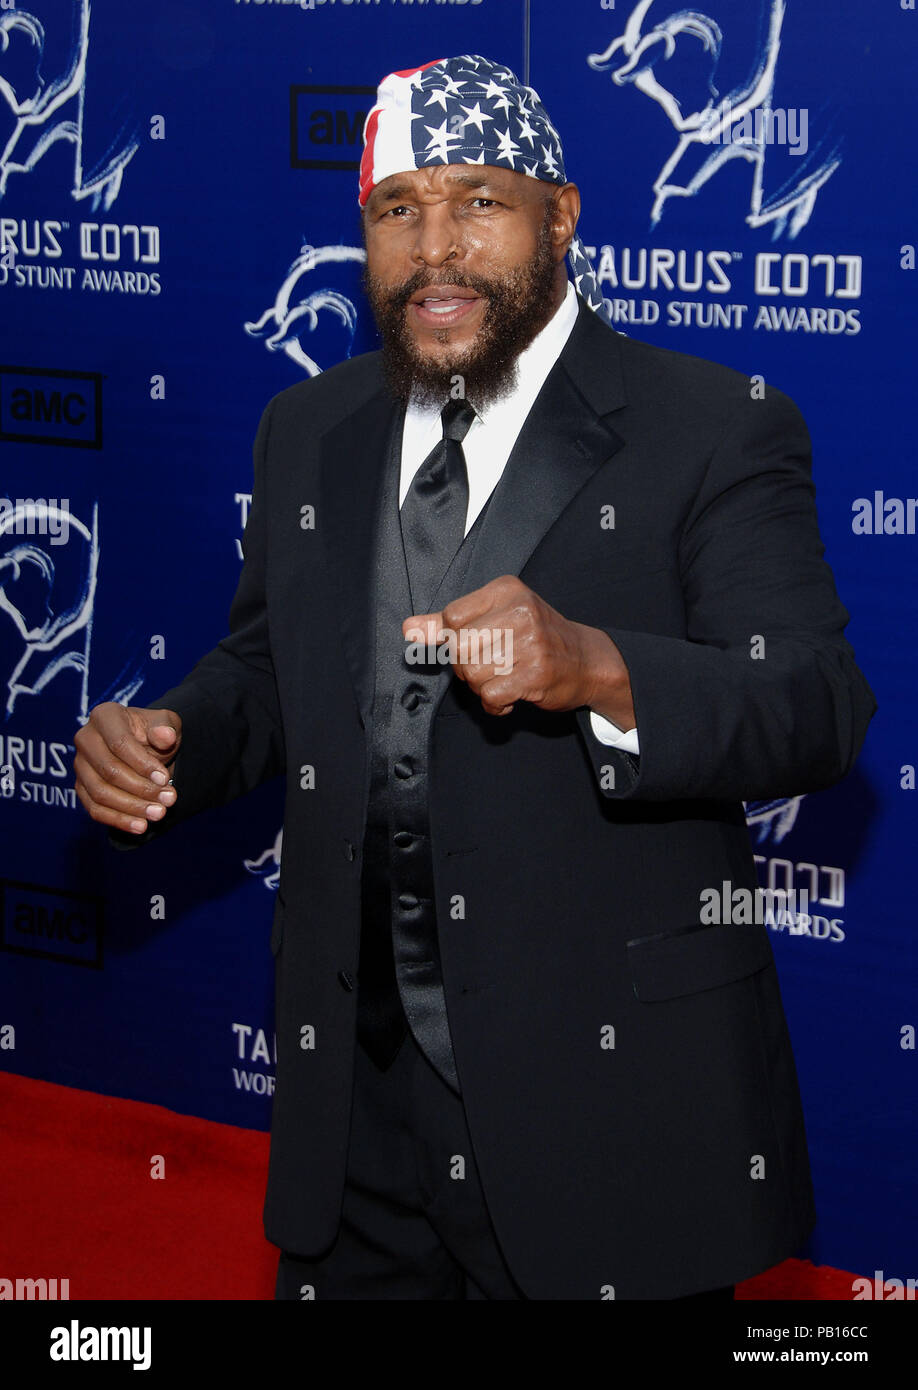 Mister T  arriving at the 2007 TAURUS World Stunt Awards on the Paramount Lot  In Los Angeles.   3/4 eye contact american flag as bandana07 MrT 108 Red Carpet Event, Vertical, USA, Film Industry, Celebrities,  Photography, Bestof, Arts Culture and Entertainment, Topix Celebrities fashion /  Vertical, Best of, Event in Hollywood Life - California,  Red Carpet and backstage, USA, Film Industry, Celebrities,  movie celebrities, TV celebrities, Music celebrities, Photography, Bestof, Arts Culture and Entertainment,  Topix, vertical, one person,, from the years , 2006 to 2009, inquiry tsuni@Gamma-U Stock Photo